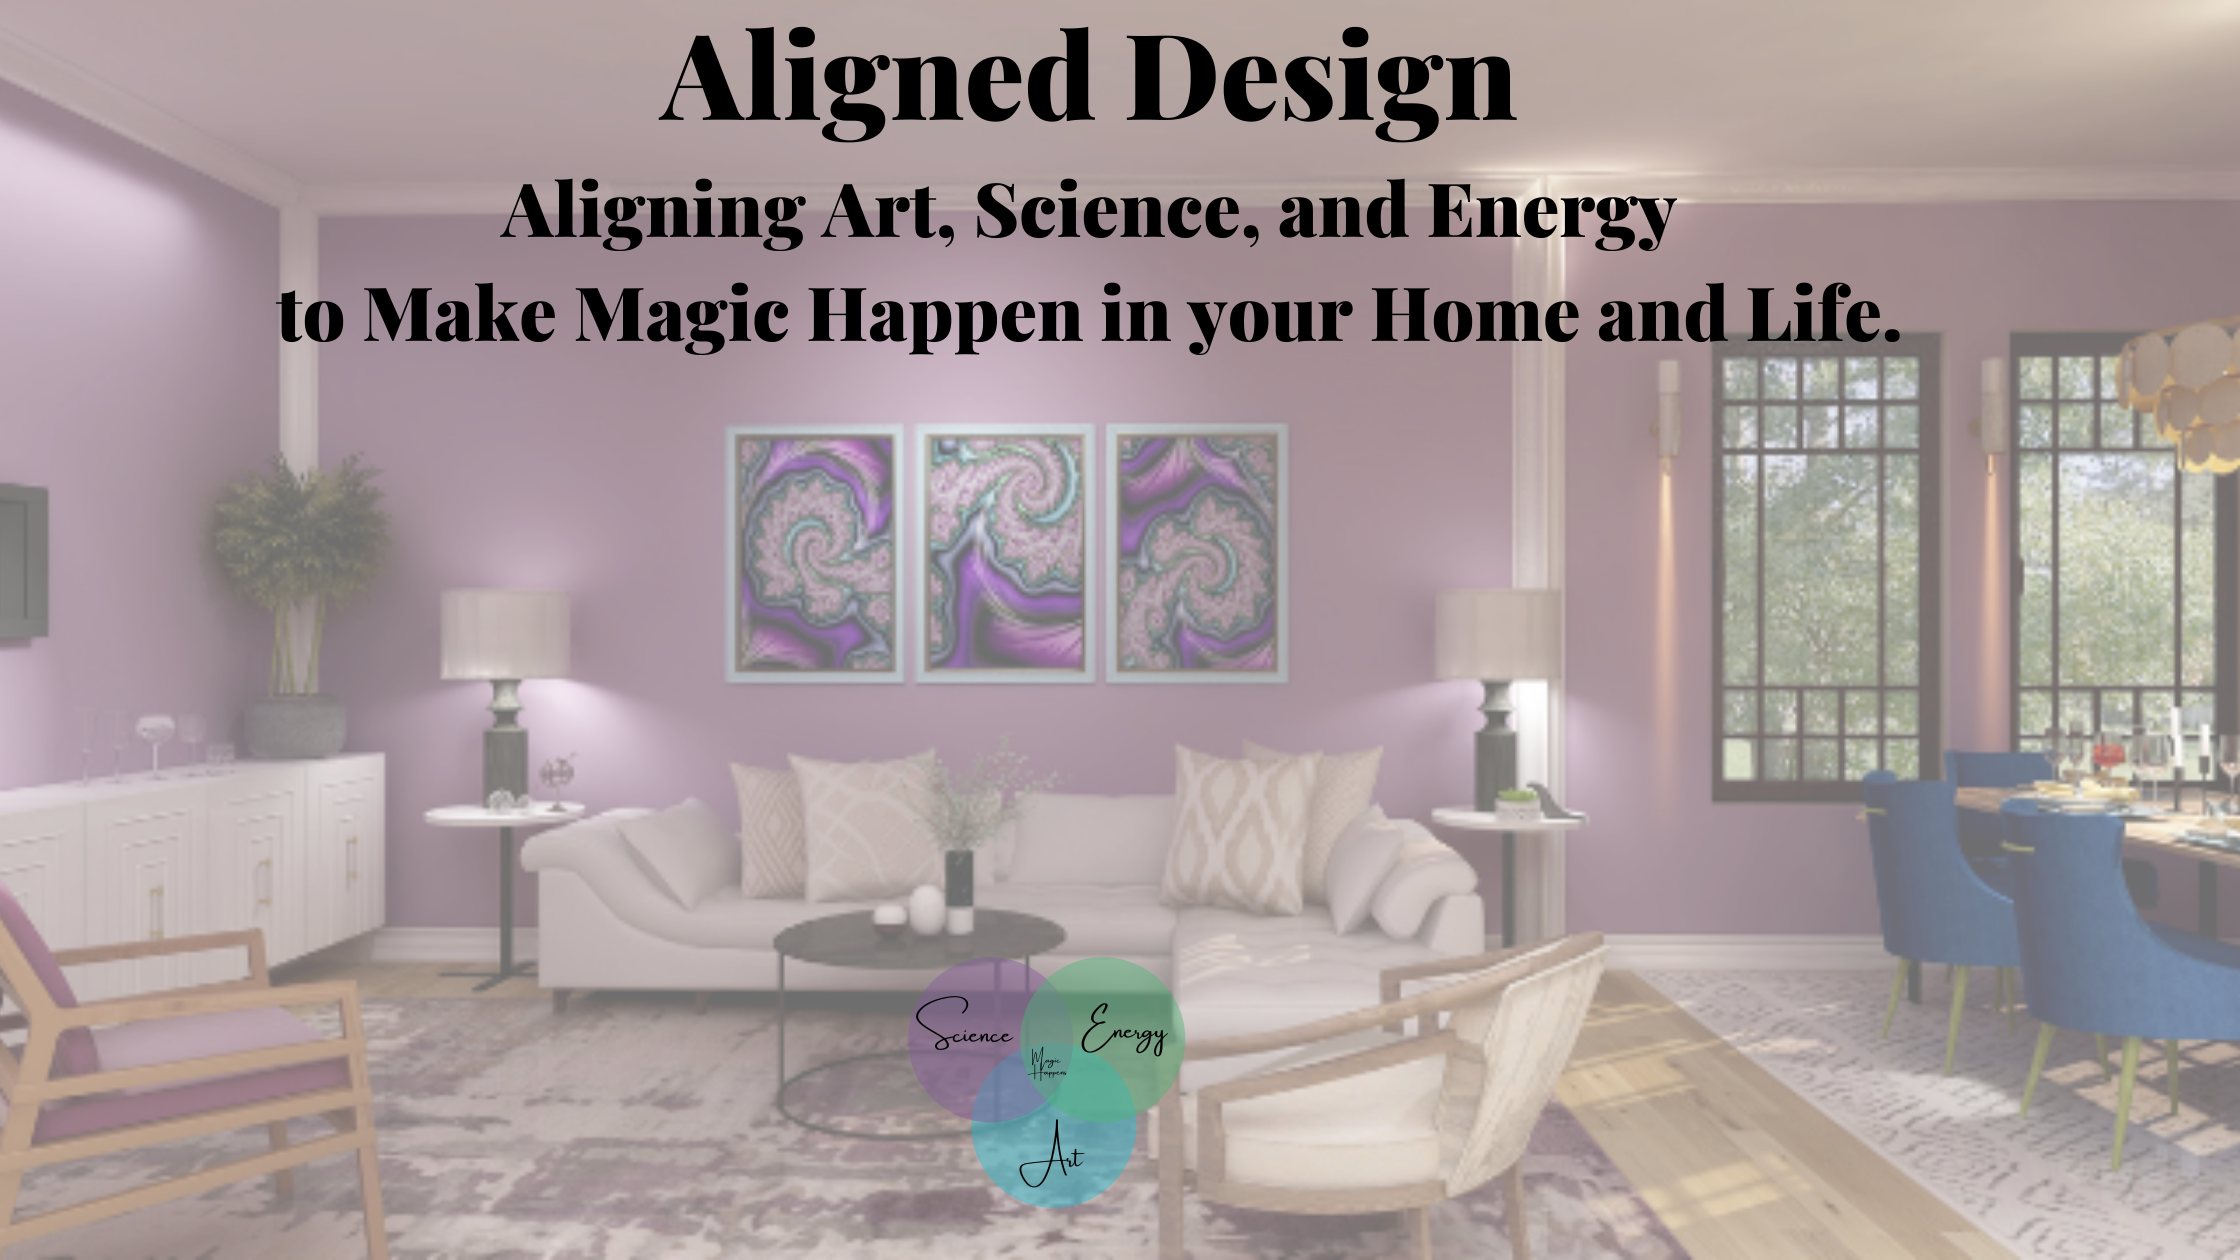 Home page of Northern Lights Home Staging and Design. Aligned Design is a unique and wholistic approach that aligns art, science and energy.